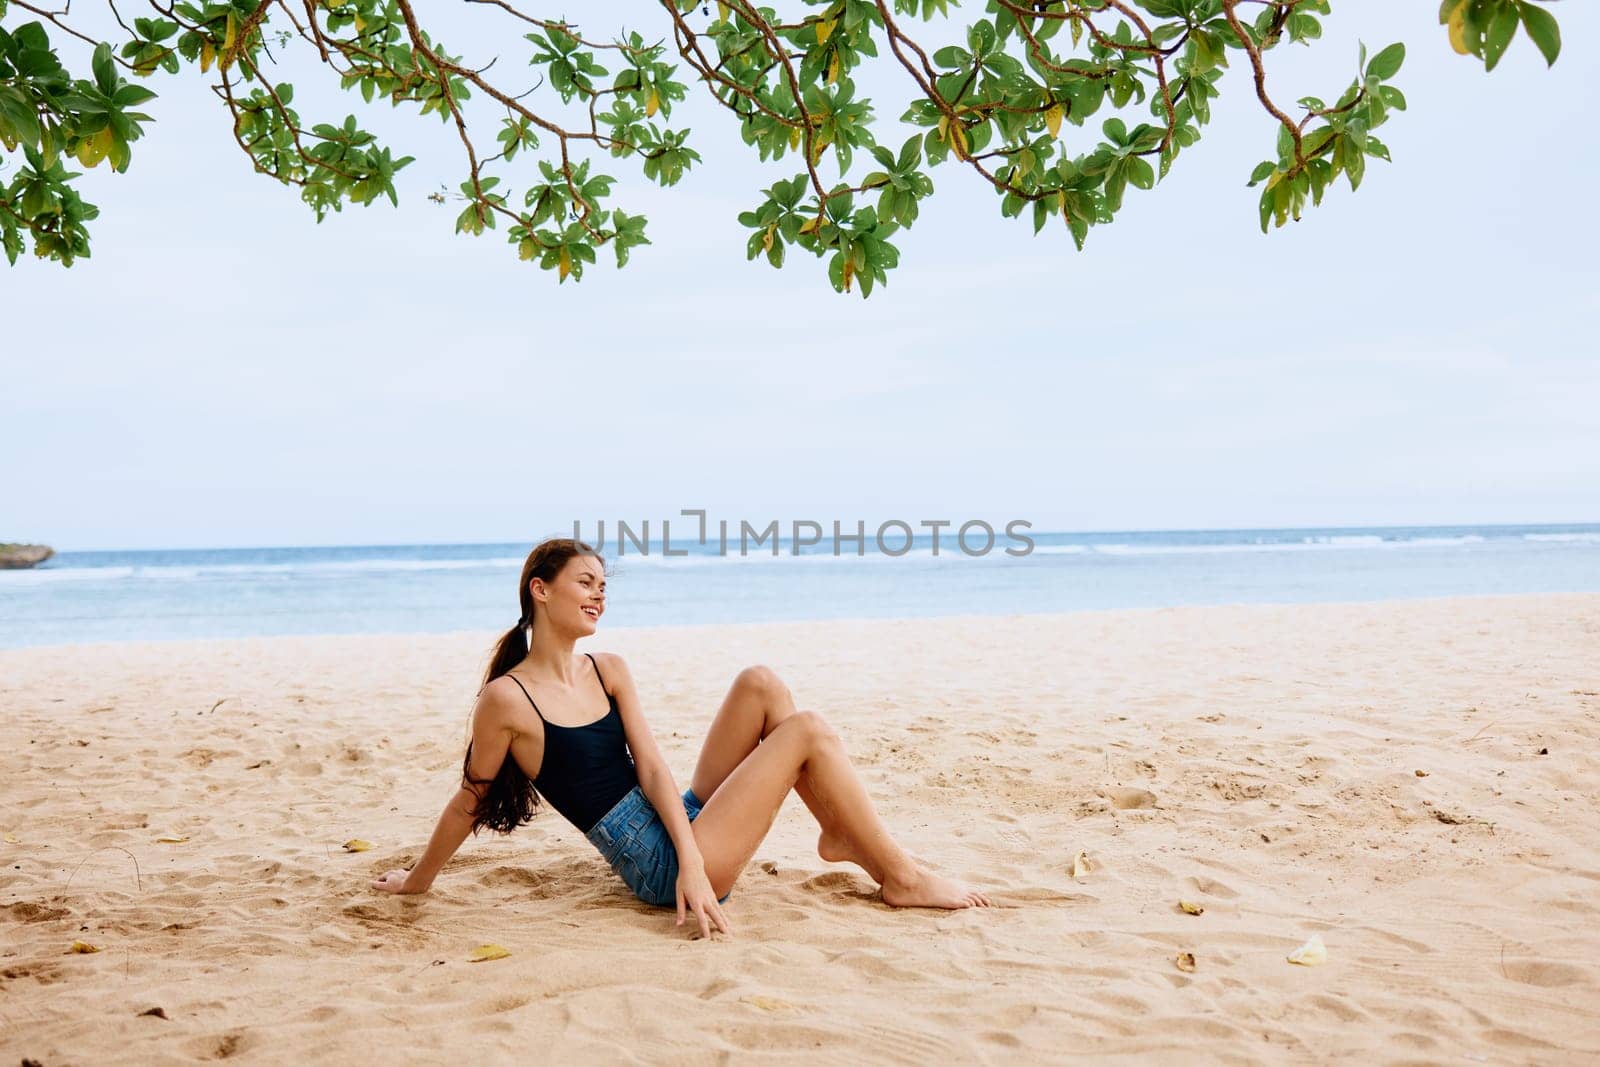 woman carefree freedom beautiful fashion sea relax ocean travel nature alone lifestyle sitting vacation summer smile holiday sand bali beach water